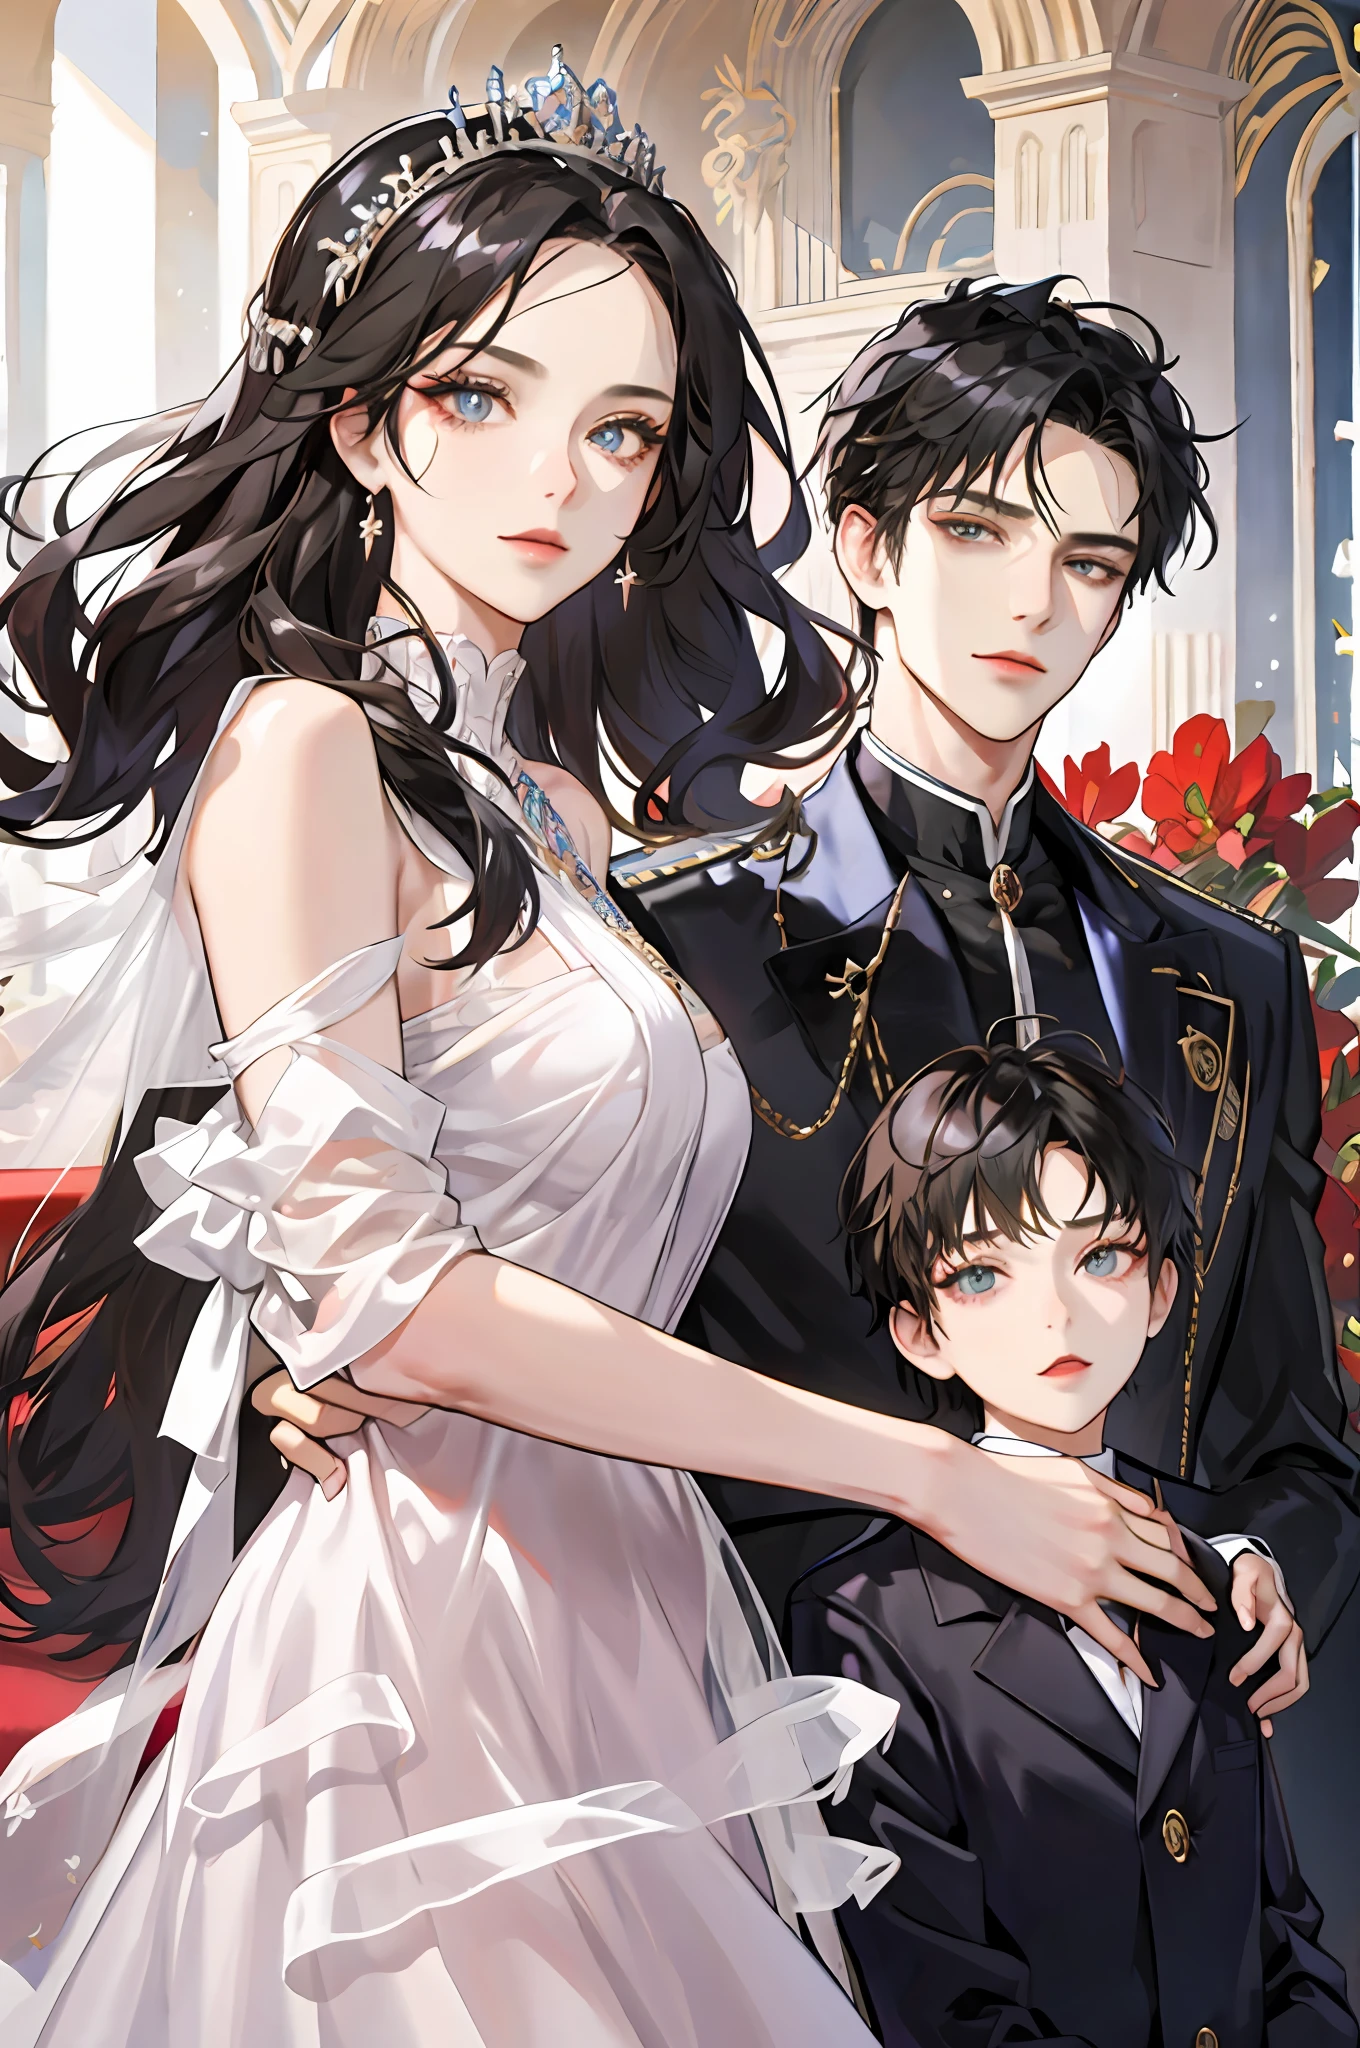 family, royal, elegant, good looking, kids, detailed, 4k, mom and dad, detailed eyes, pretty hair, handsome man, gorgeous woman, fine mom, hot dad, hot parents, mom with black hair, mom pregnant, man looking at woman with love, man hugging woman